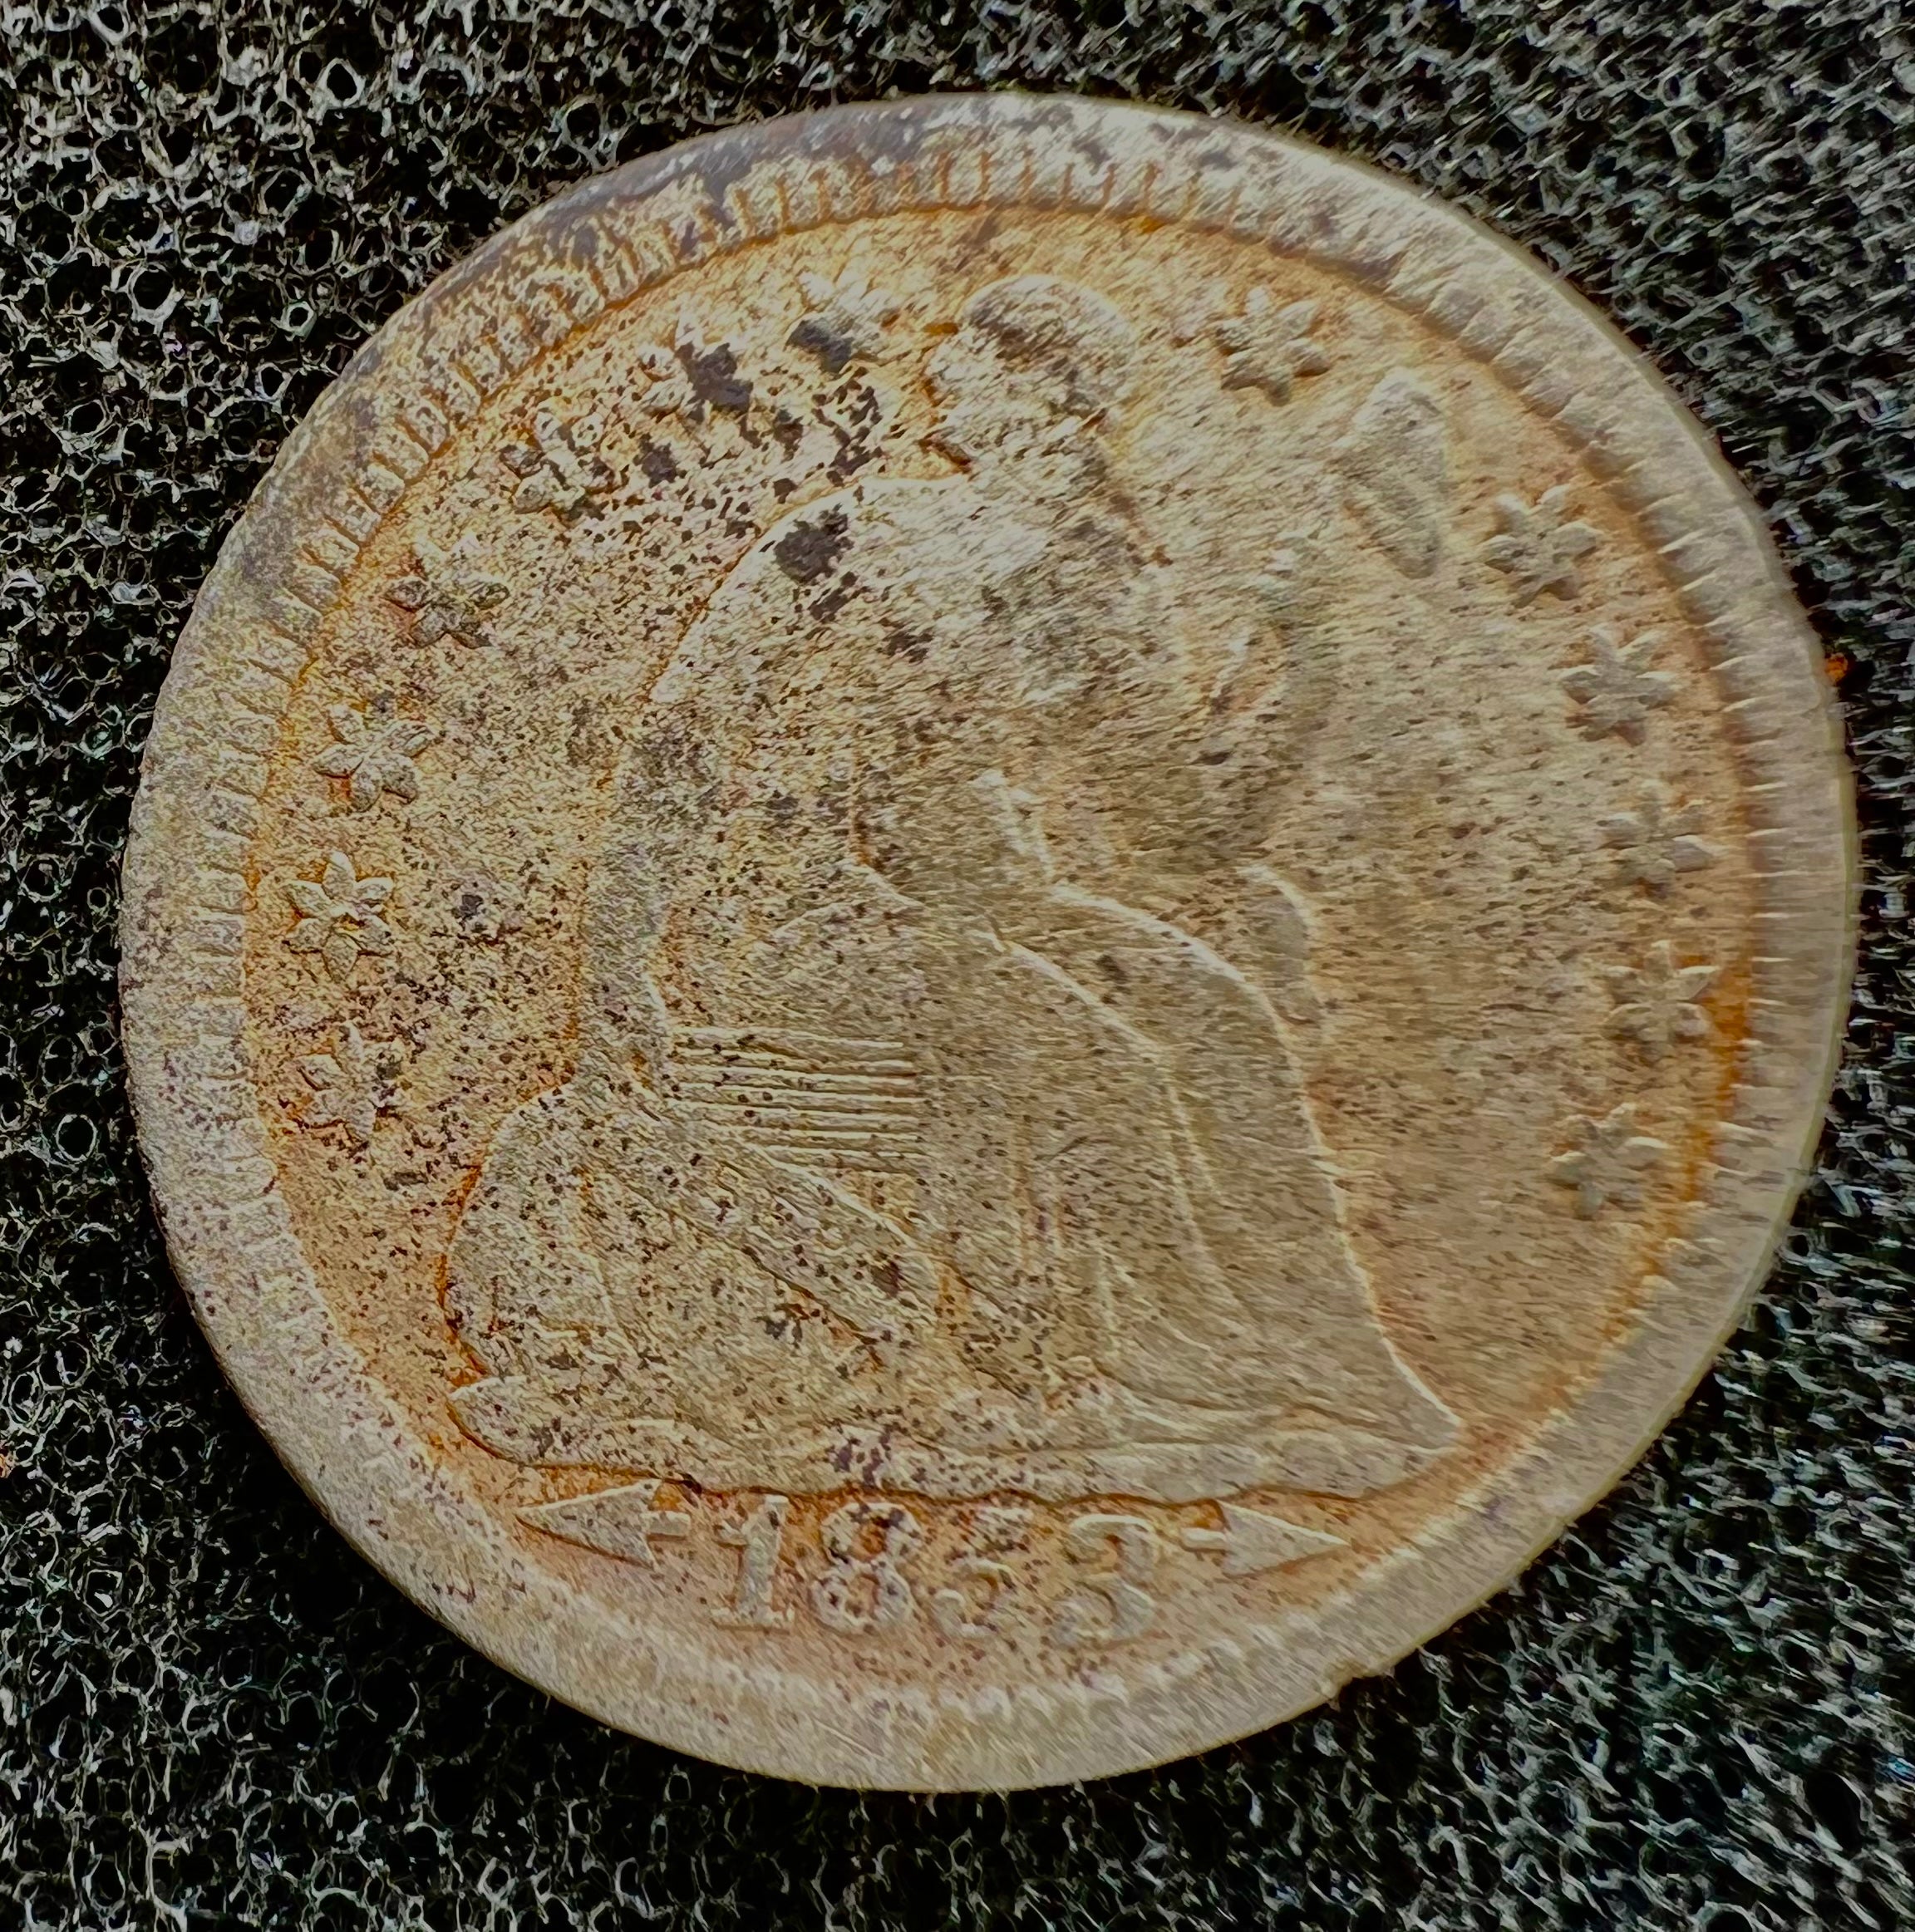 1853 Half Dime Found With Minelab GPX5000 Metal Detector in Virginia